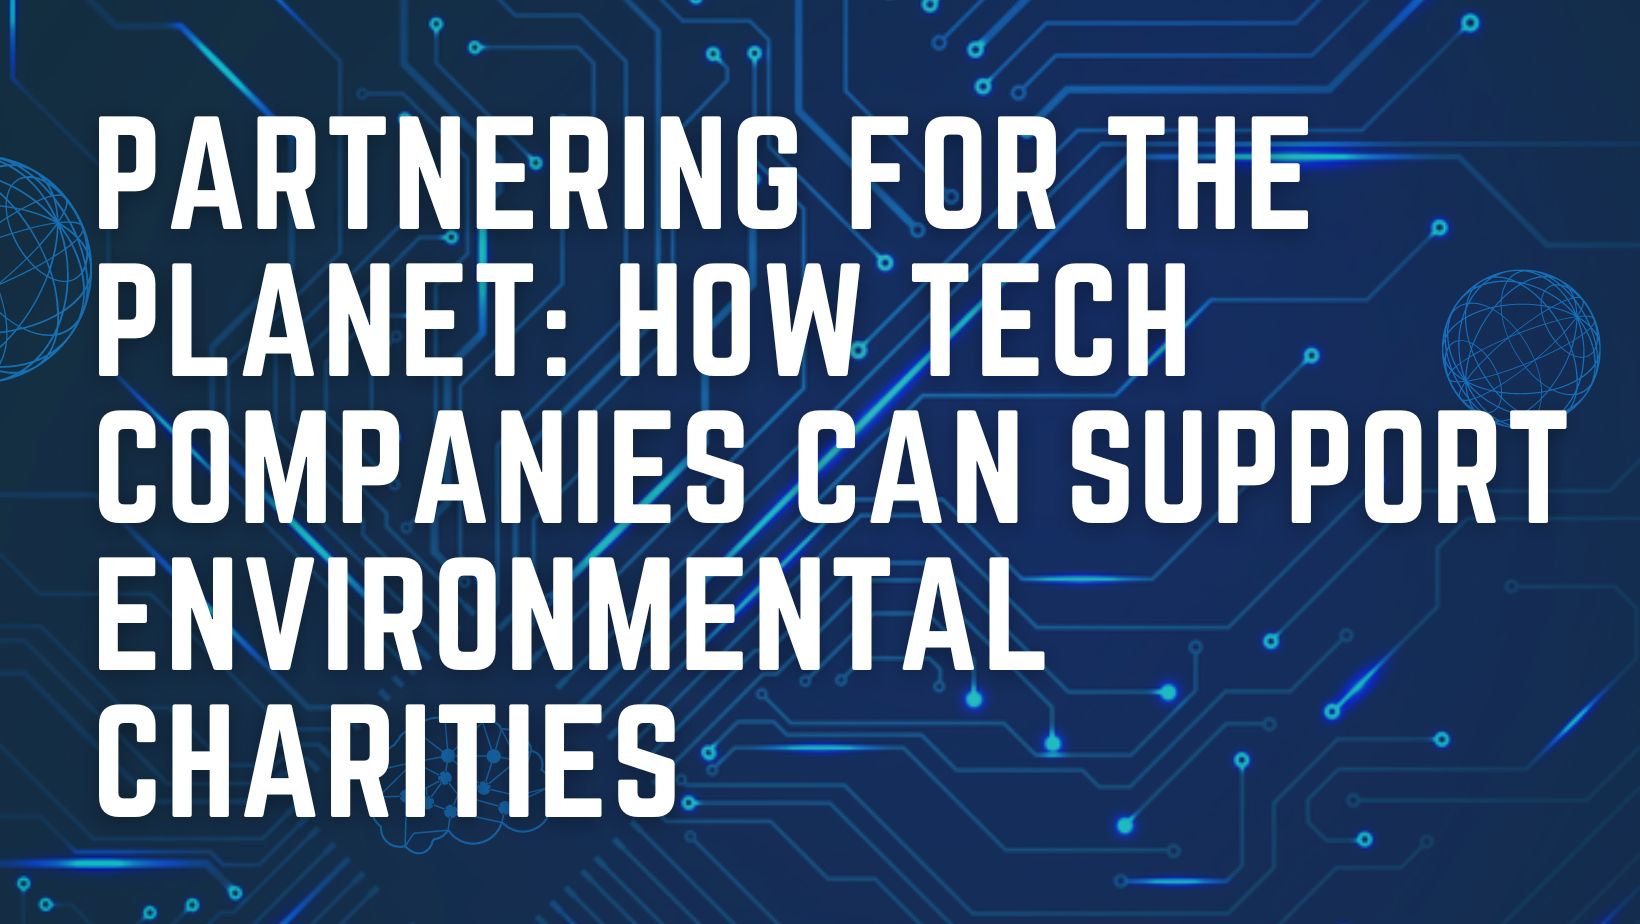 Partnering for the Planet: How Tech Companies Can Support Environmental Charities